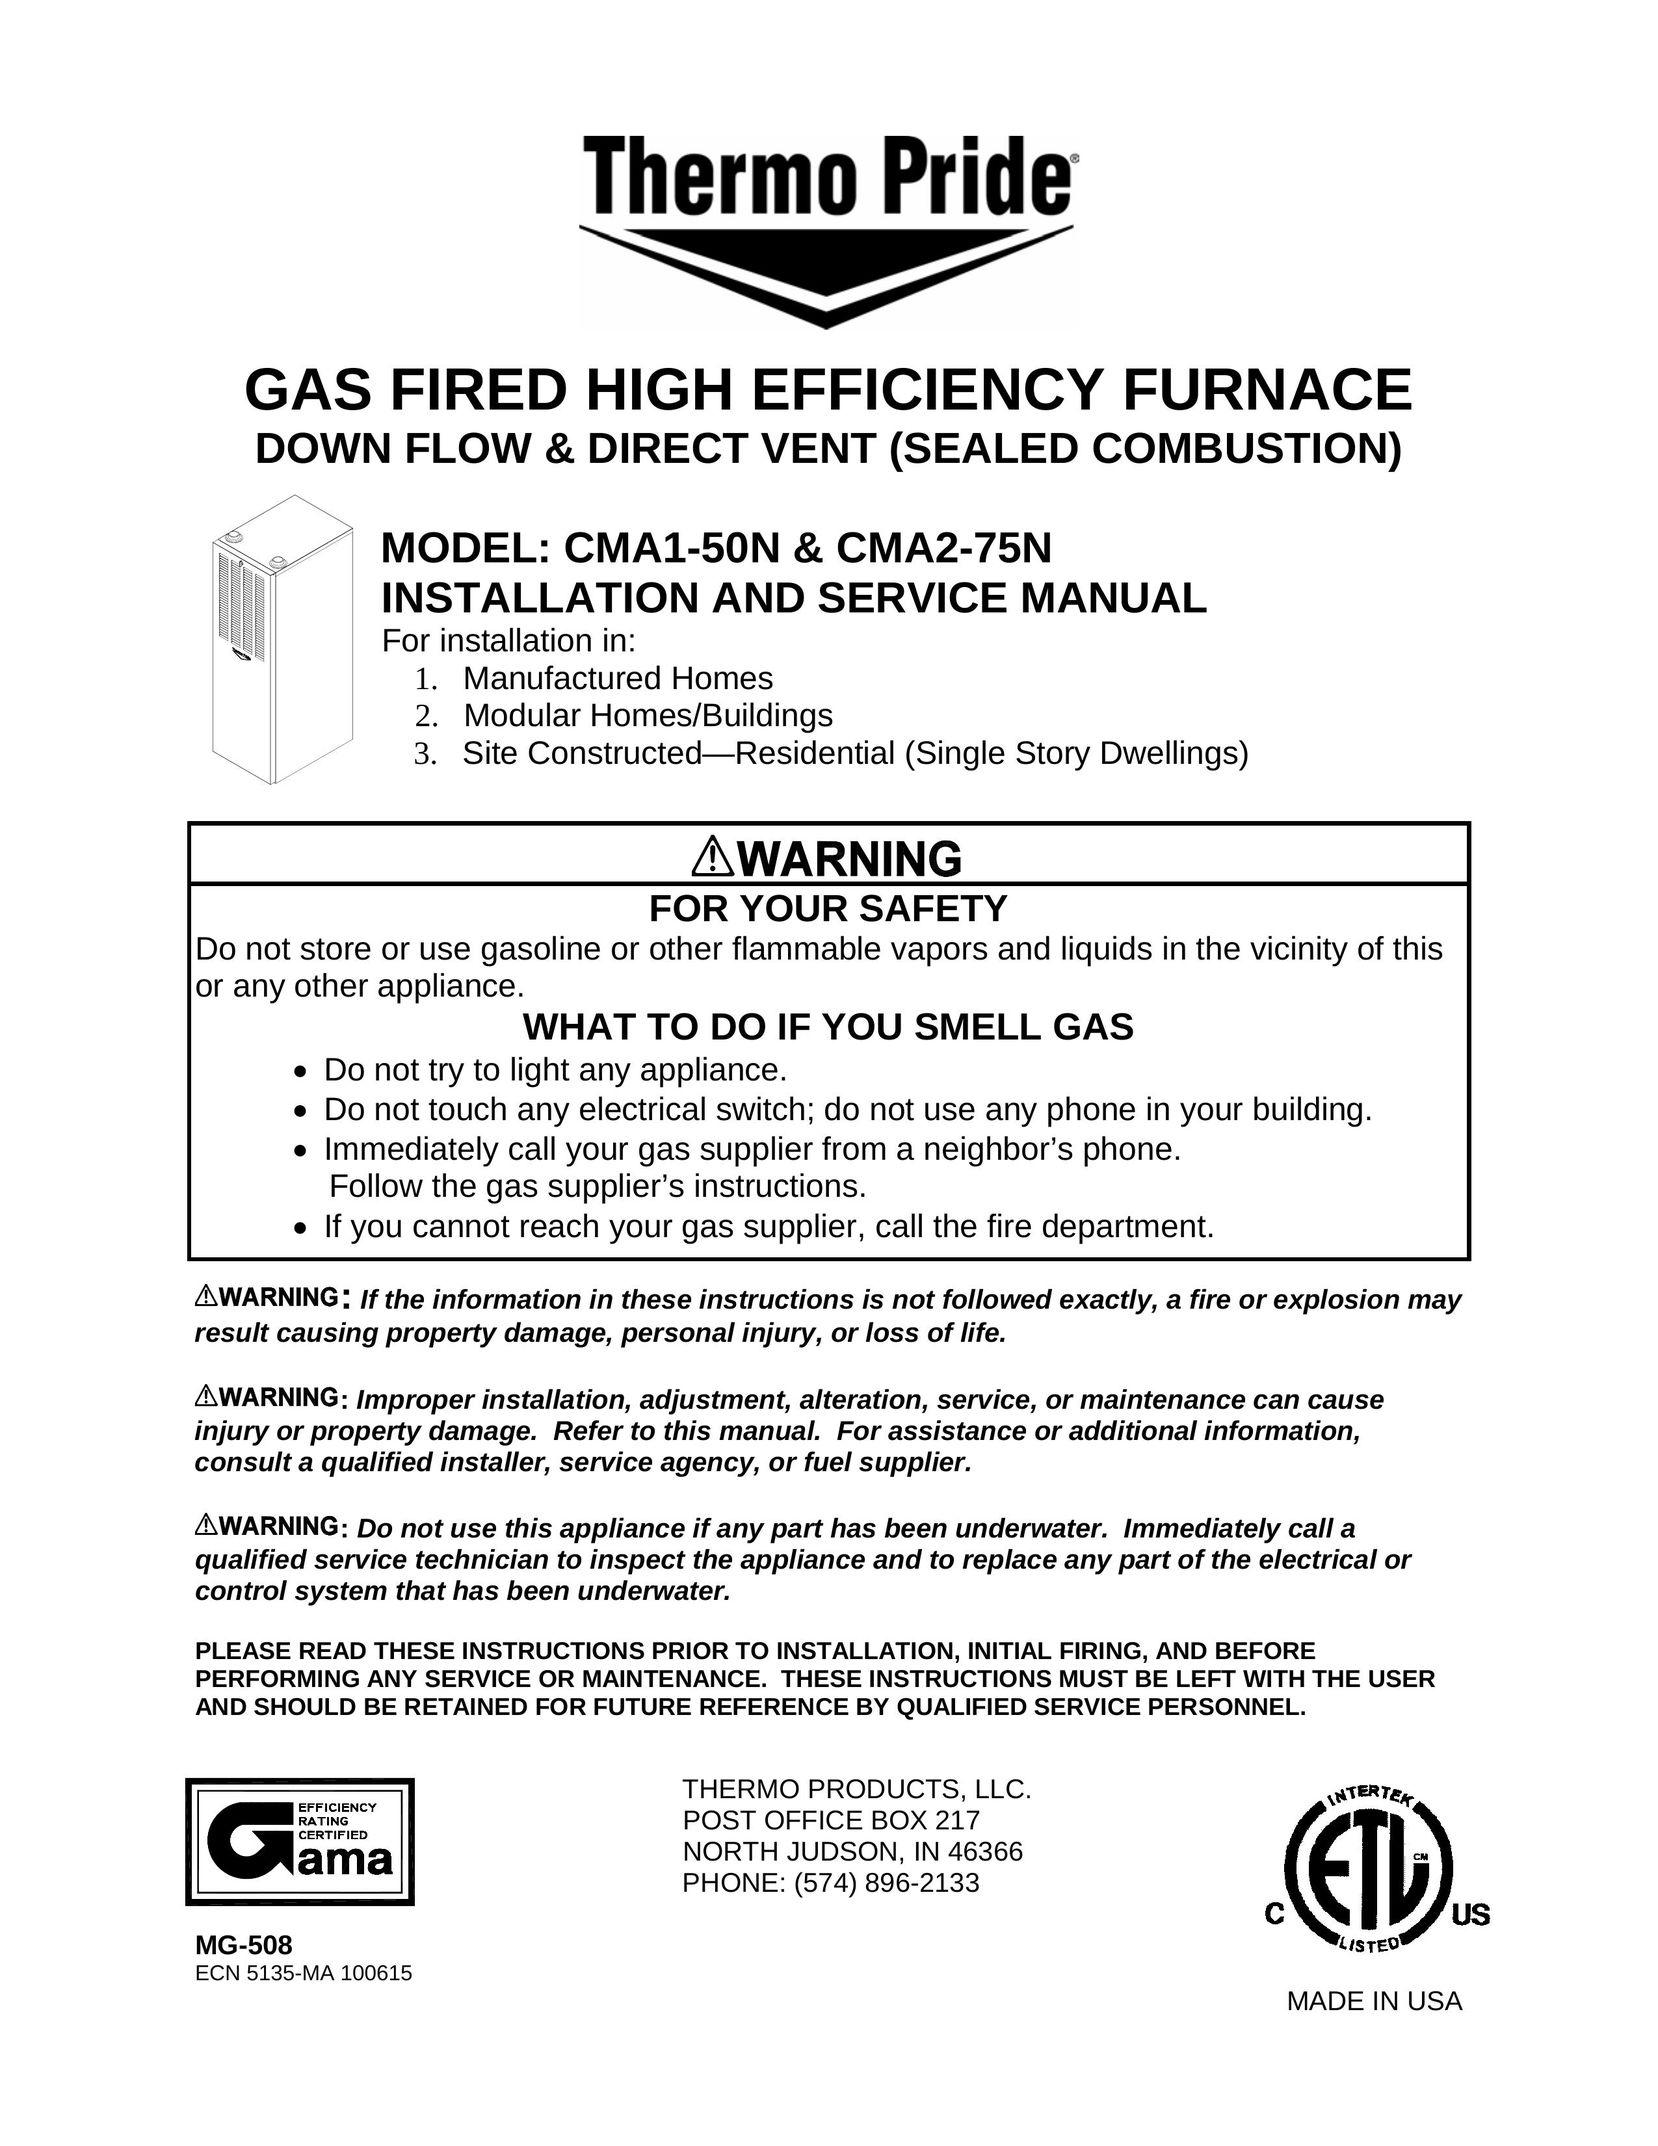 Thermo Products CMA1-50N Burner User Manual